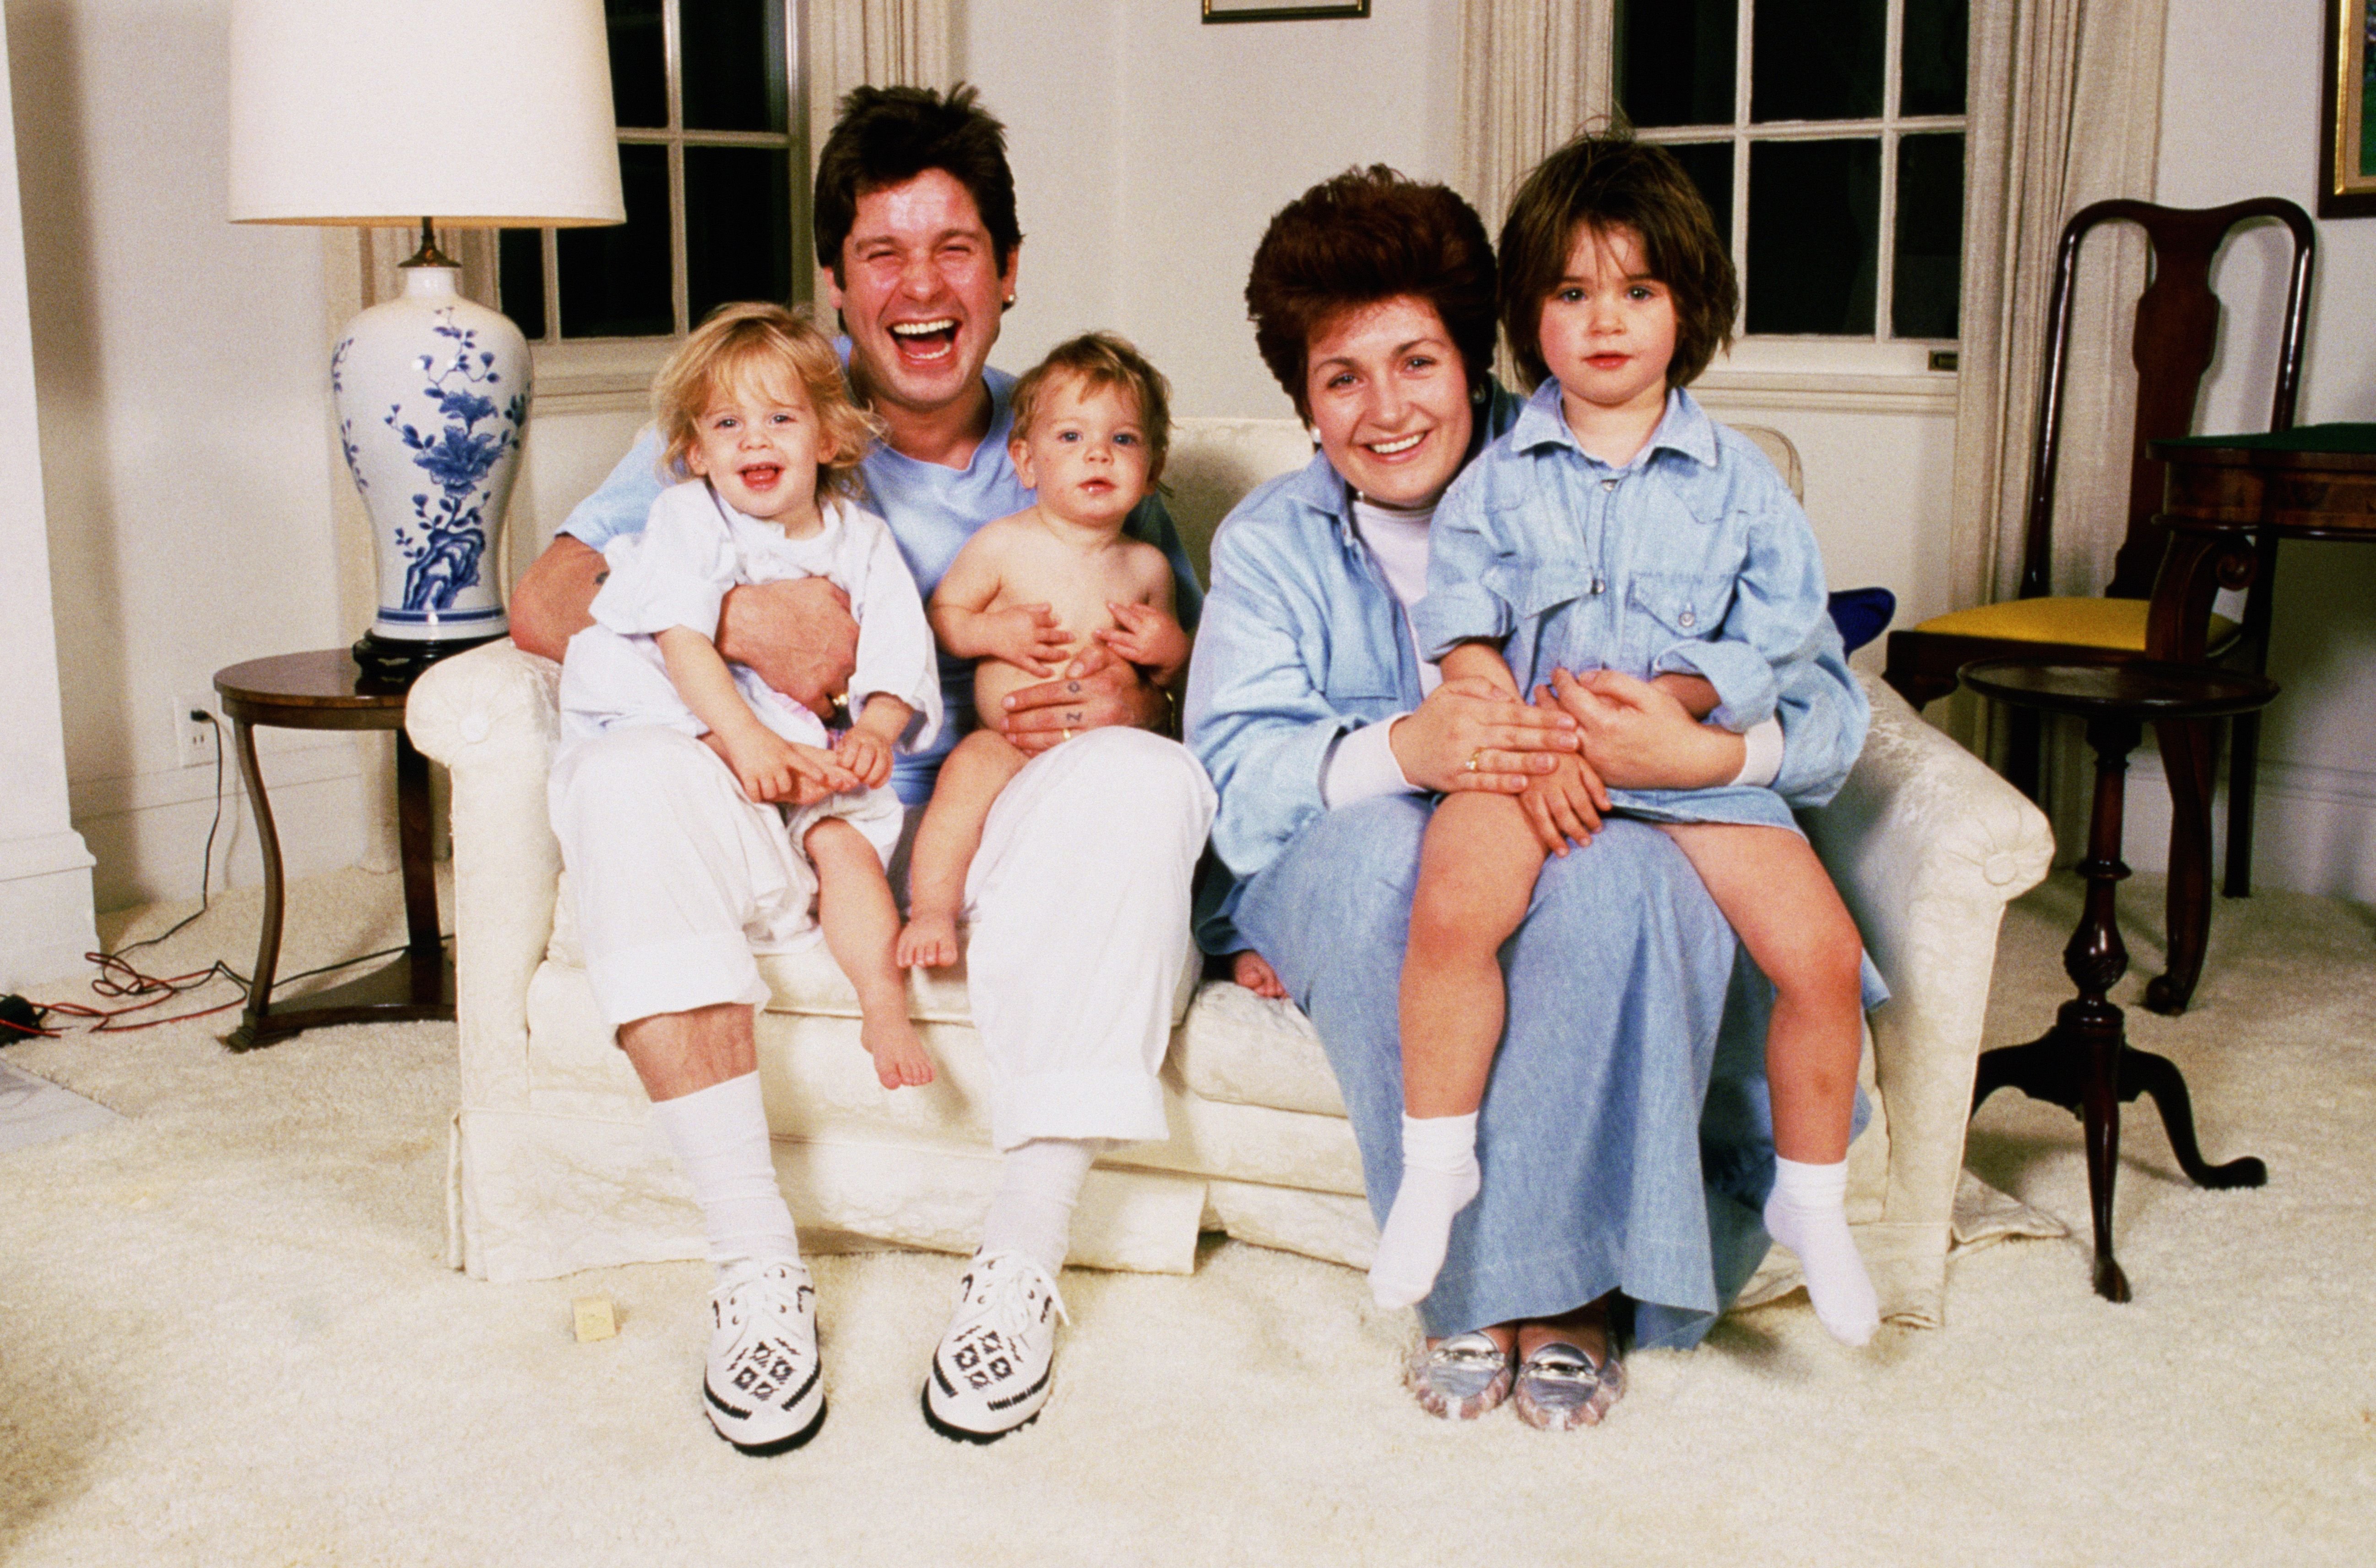 Ozzy and Sharon Osbourne at home with their children in early the 1990s | Source: Getty Images